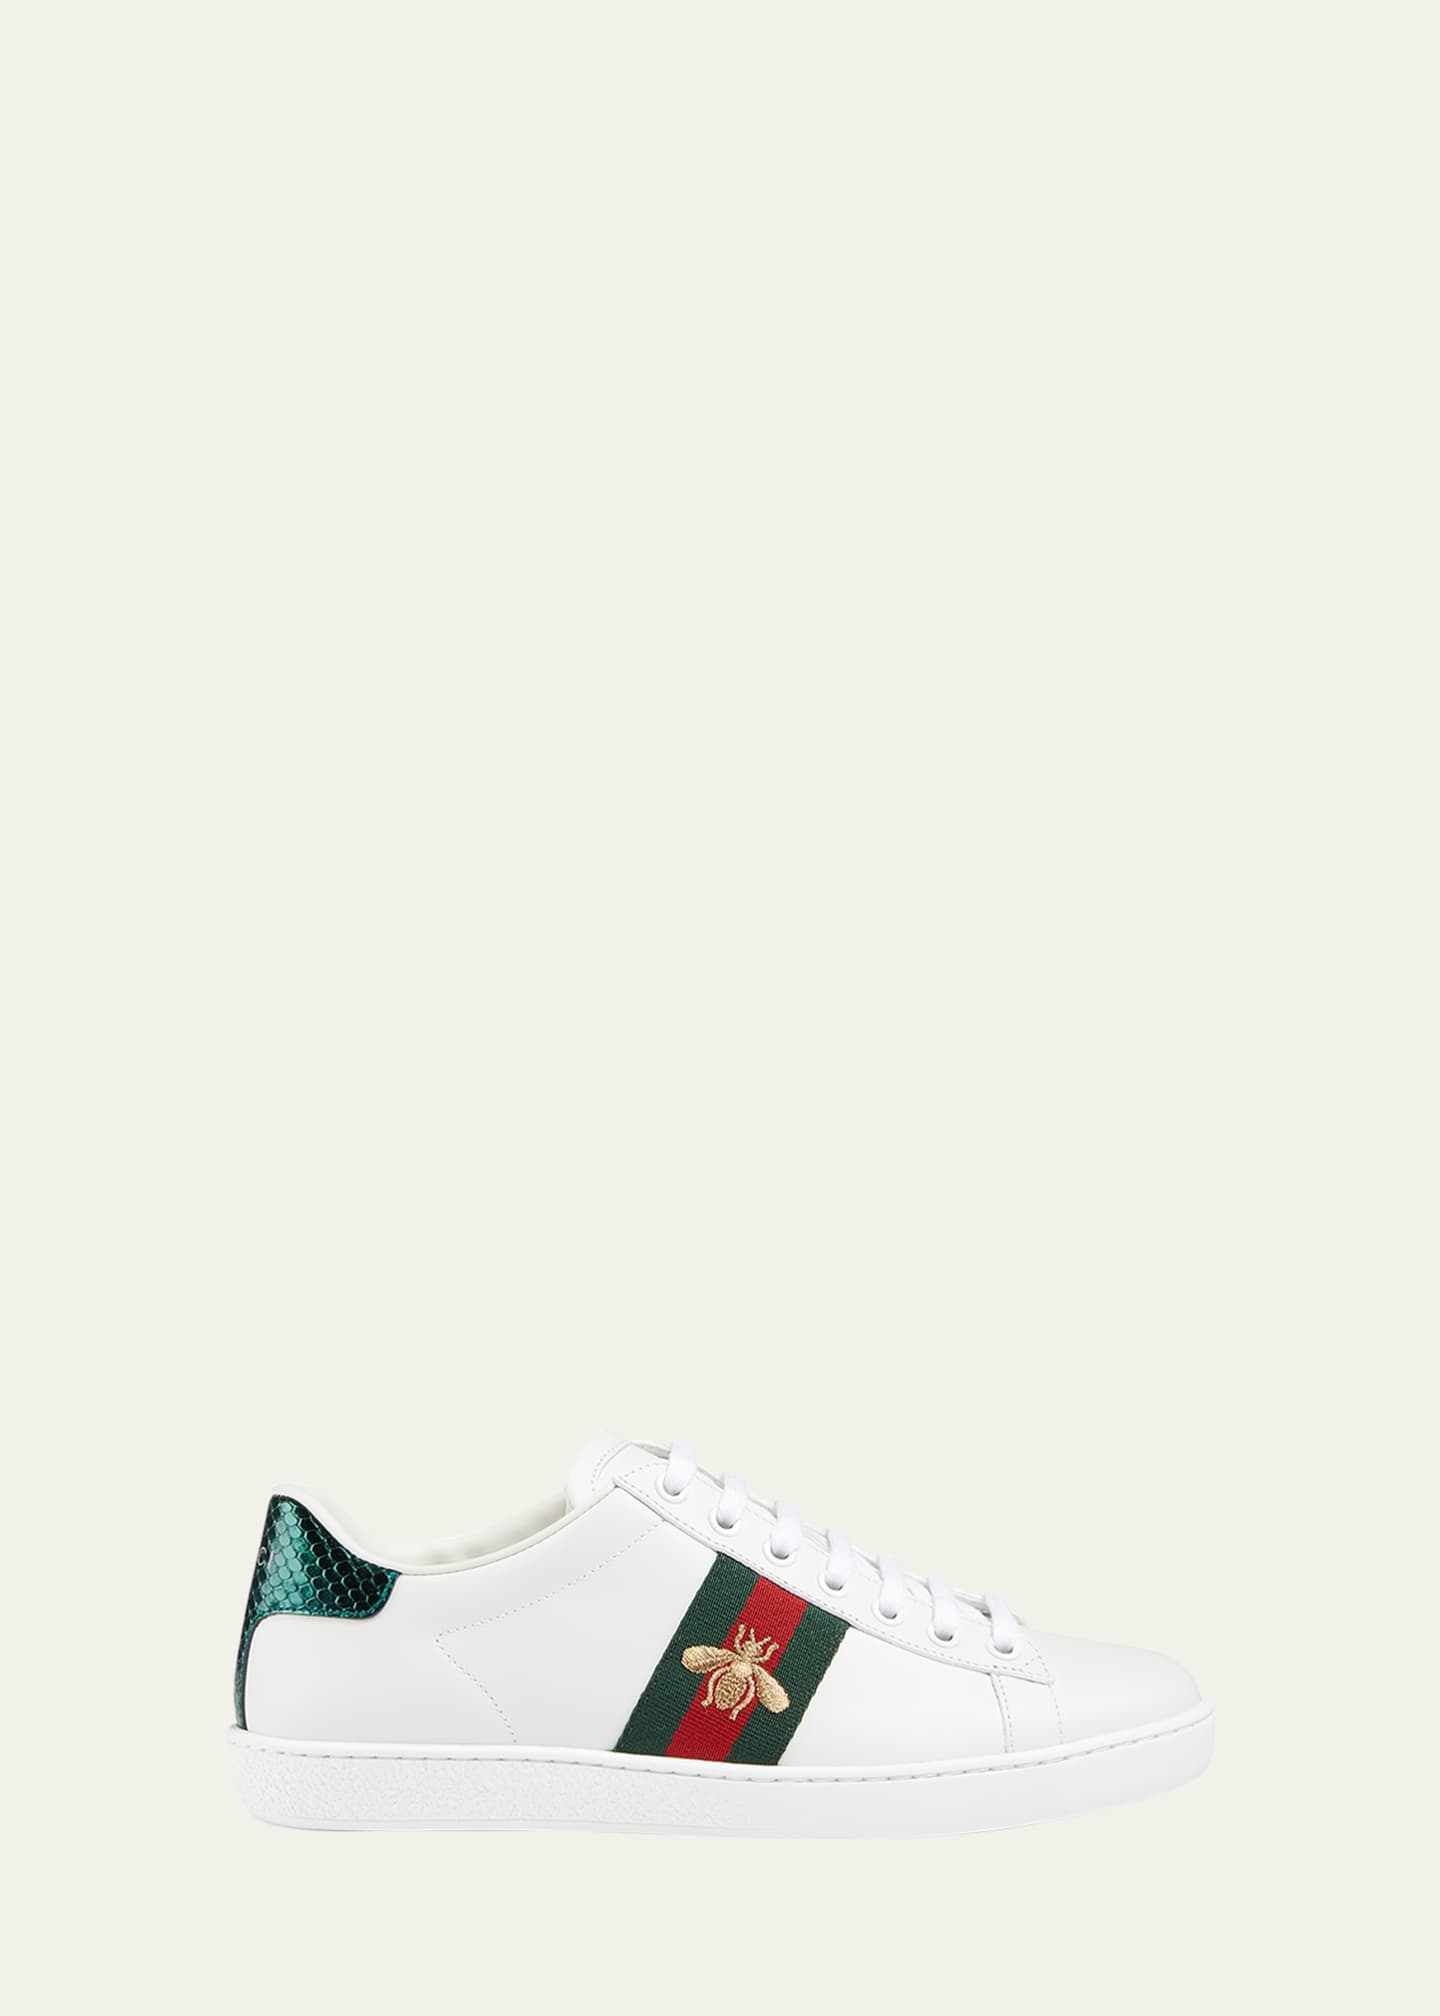 Gucci New Ace Bee Sneakers Image 1 of 3